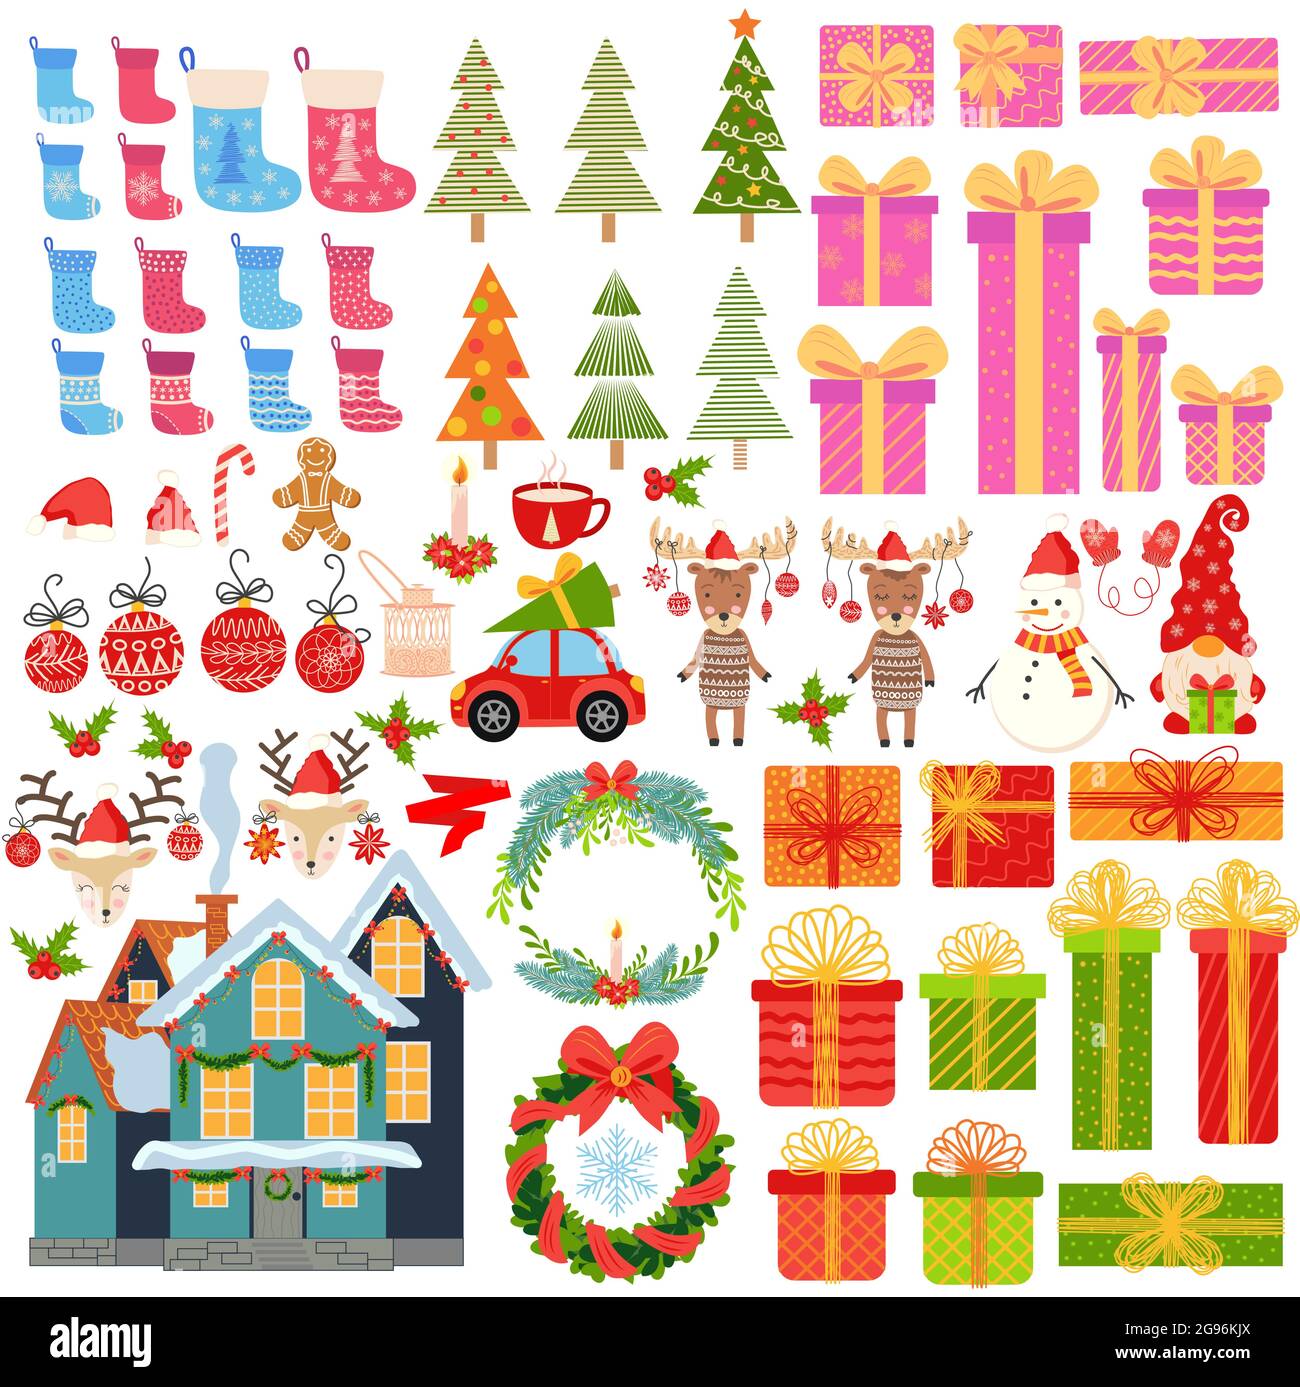 Big set of Christmas elements hand drawn. Gifts, stockings, Christmas trees, gnomes, candies, mistletoe, wreaths and other symbols of the New Year and Stock Vector